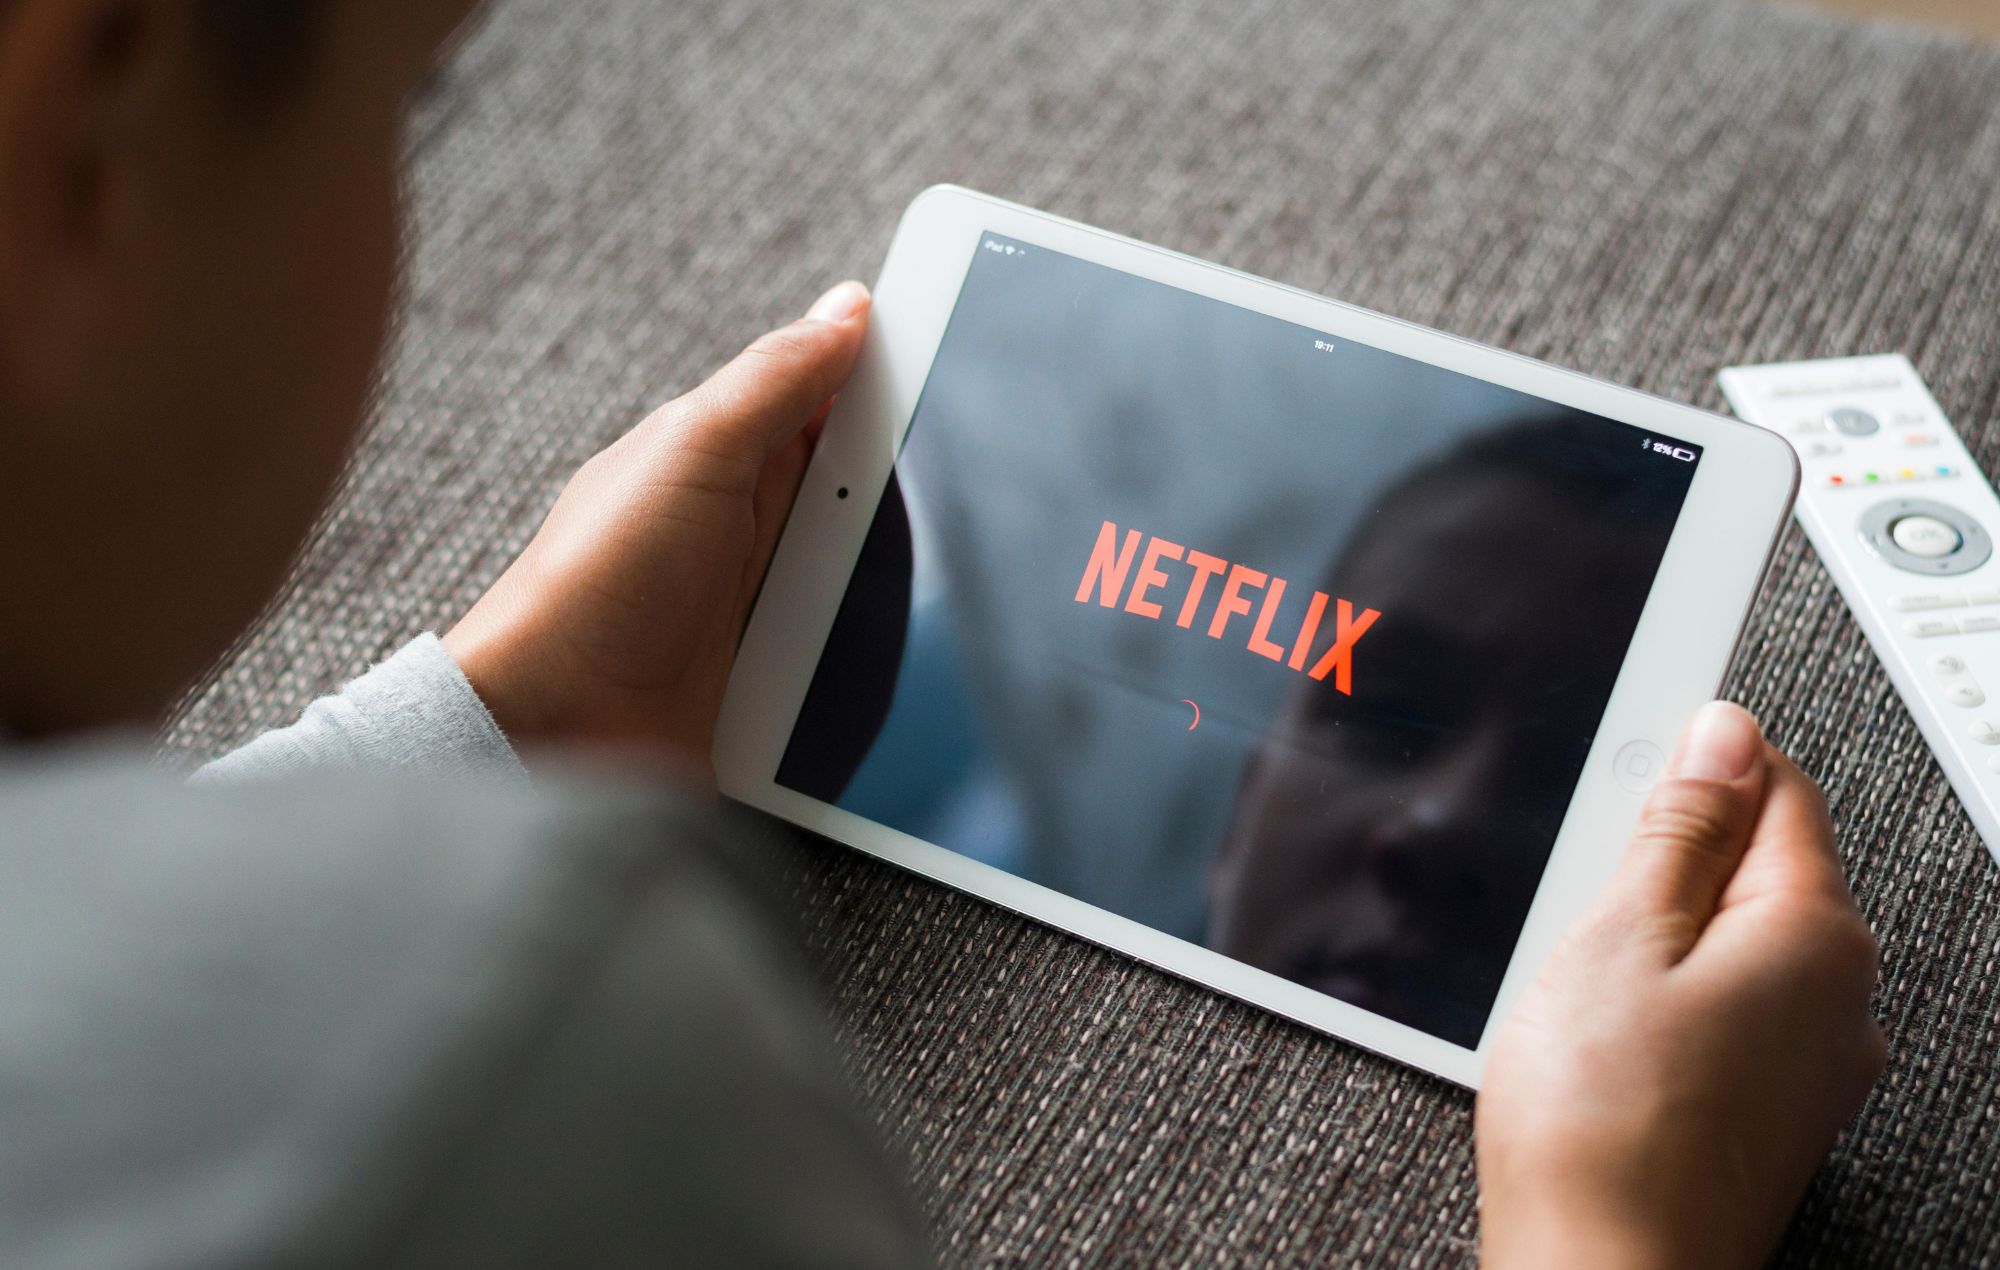 Netflix sign-ups rise over 100 per cent after password sharing crackdown